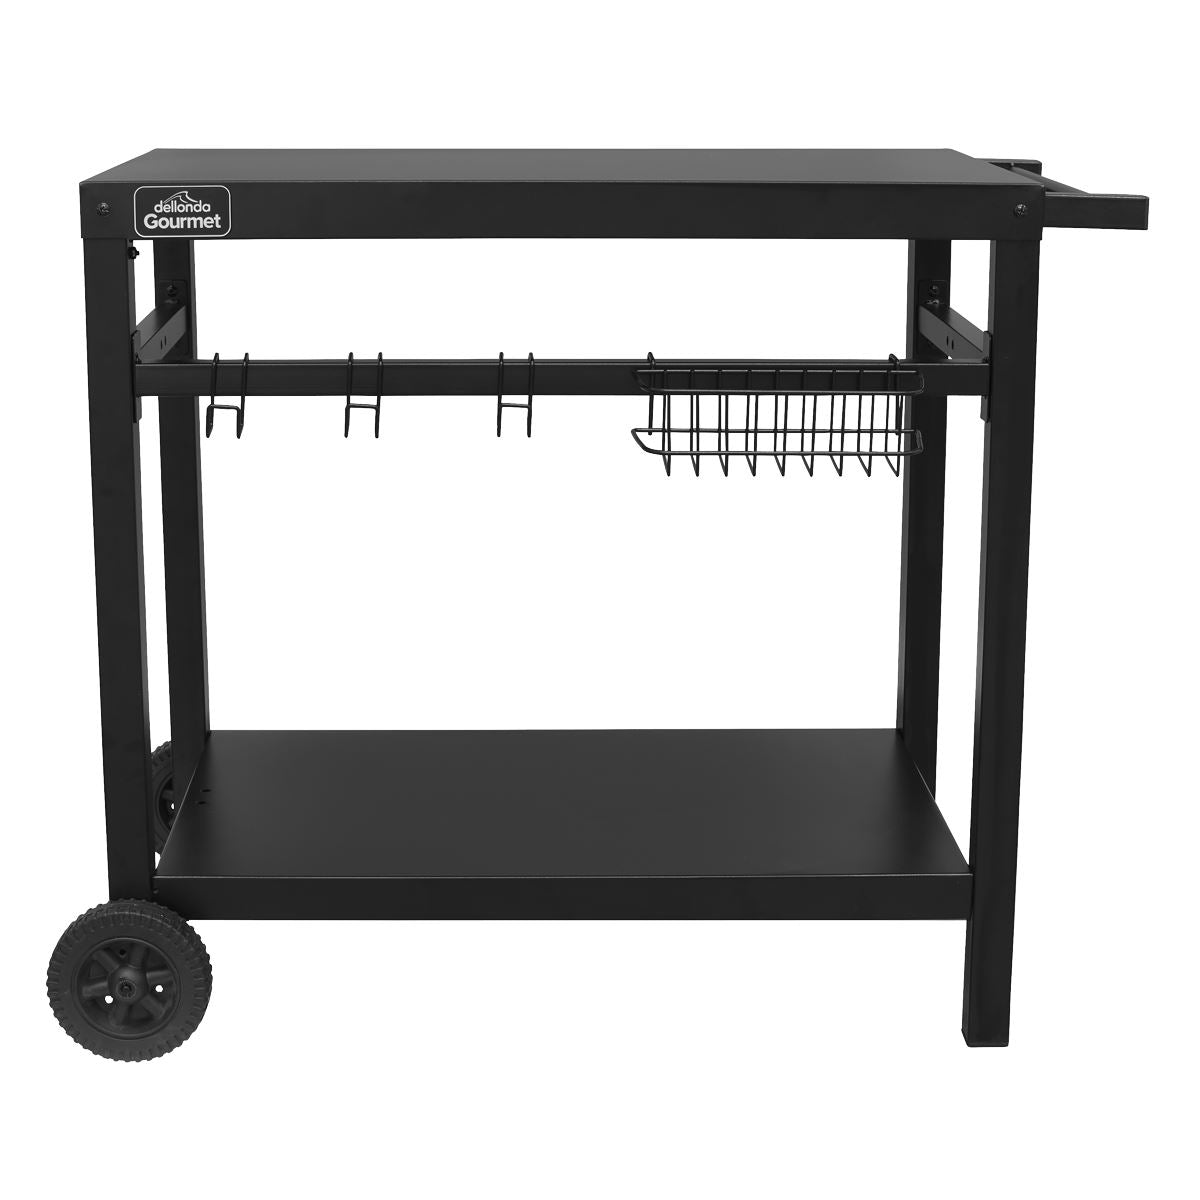 Dellonda BBQ & Plancha Trolley for Outdoor Cooking with Utensil Holder, Black - DG45